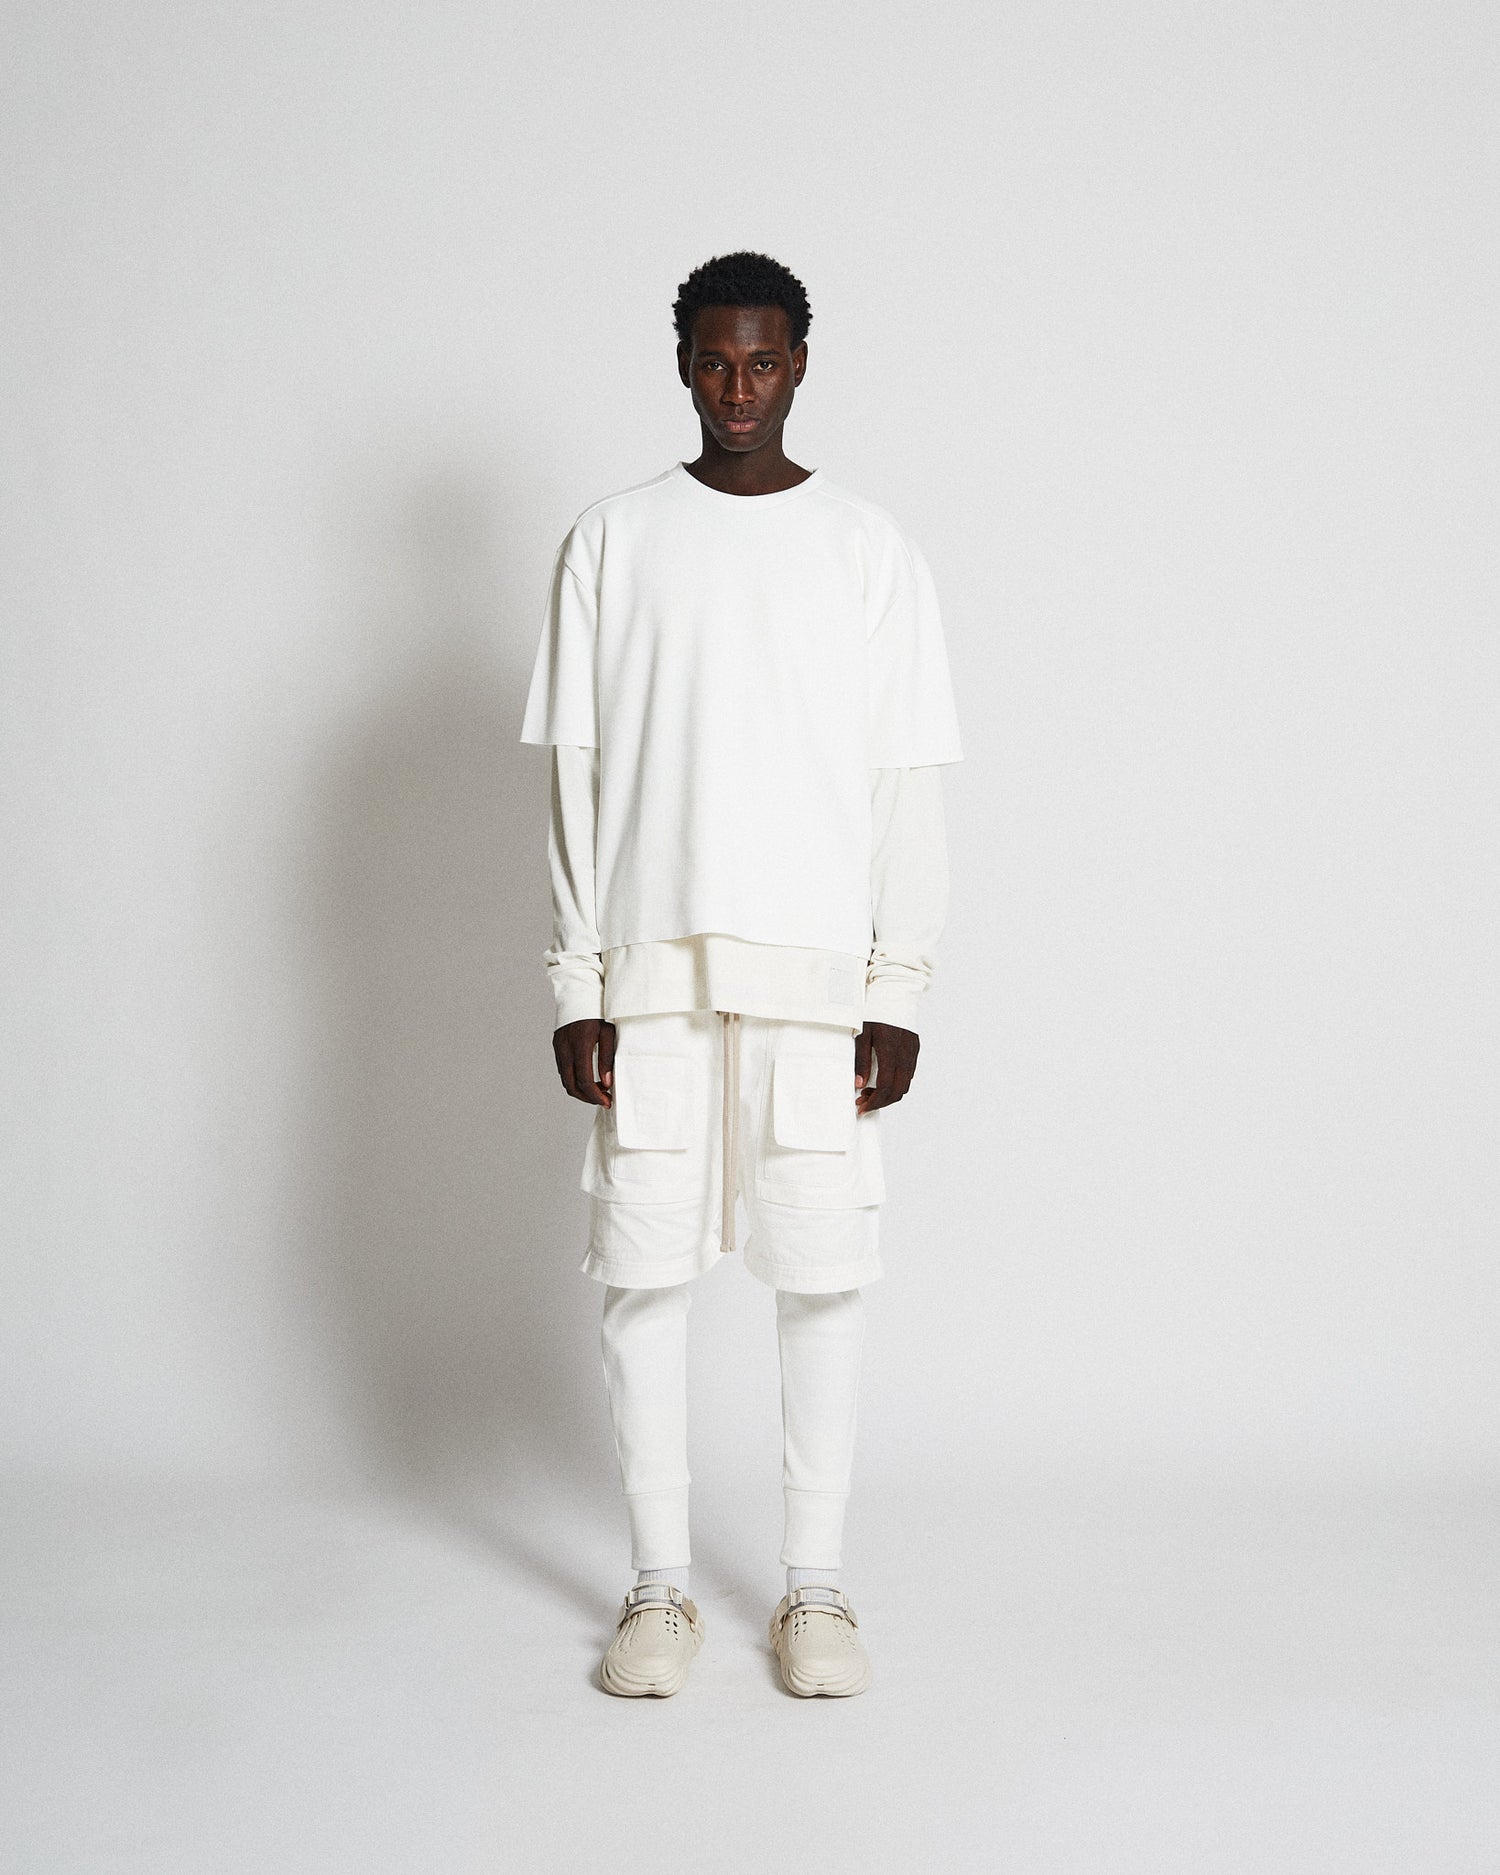 Male model wearing all white convertible pants, long sleeve, leggings, and boxy t-shirt